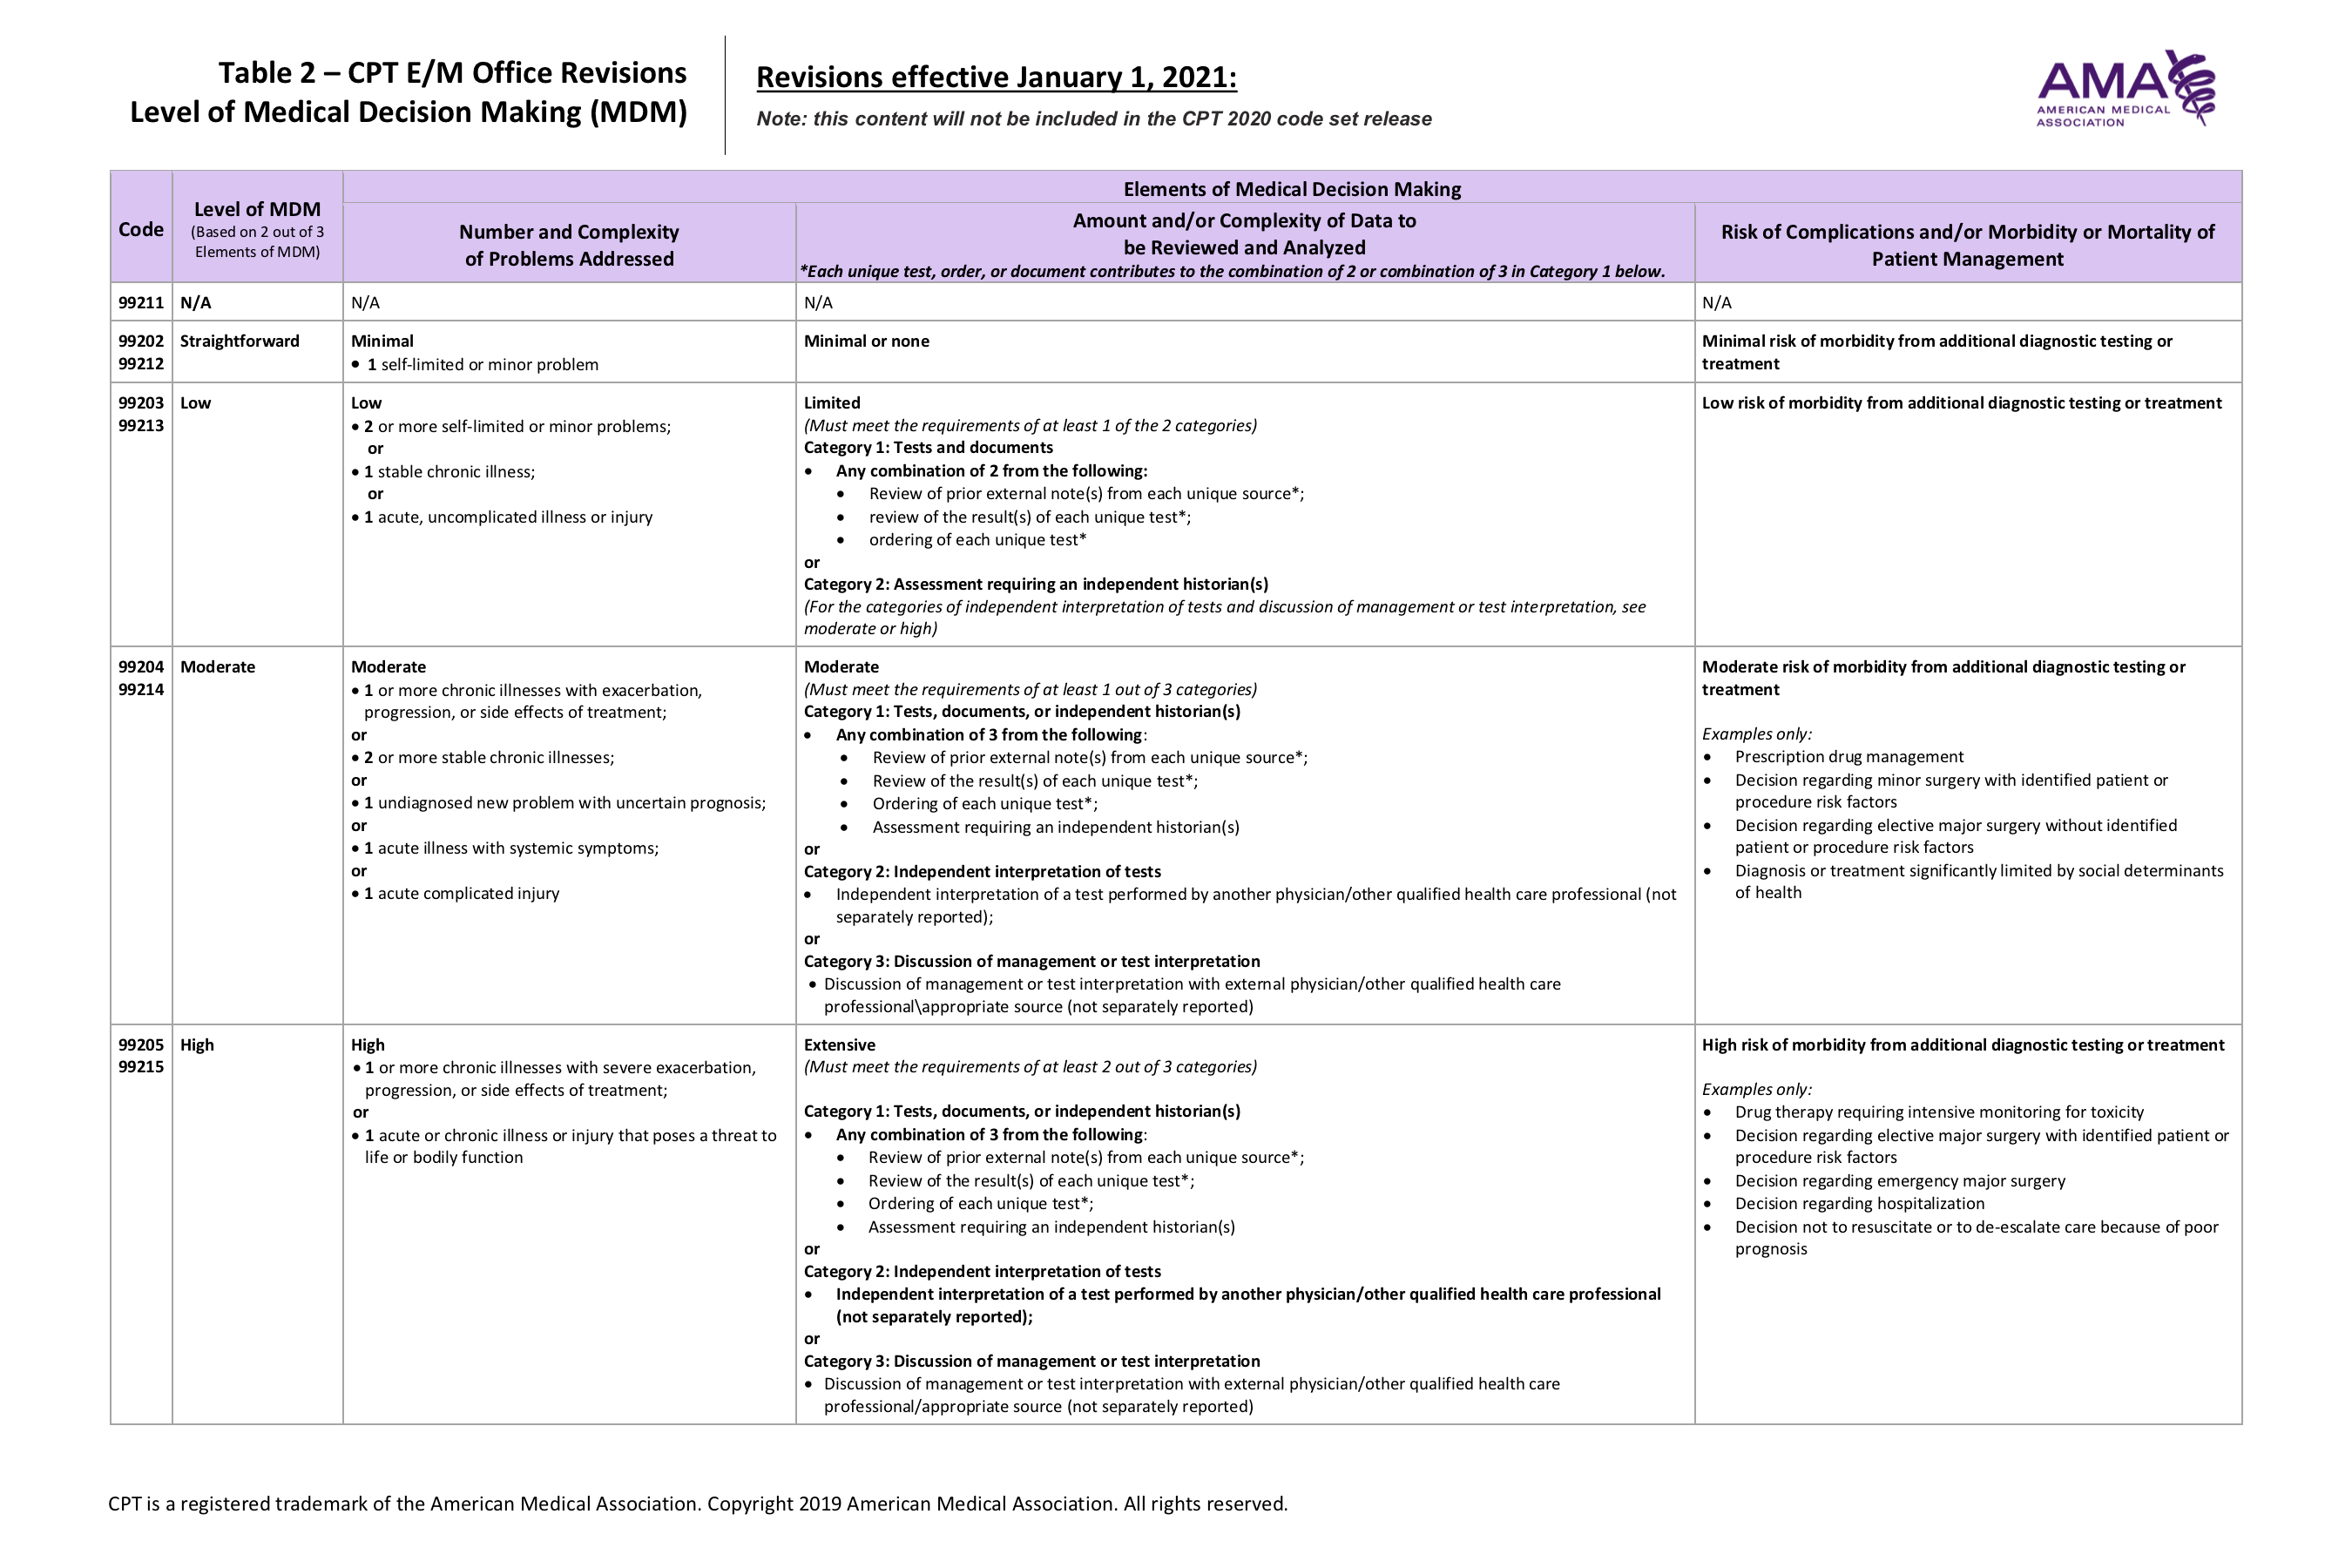 Table – CPT E/M Office Revisions Level of Medical Decision Making (Courtesy of the American Medical Association)